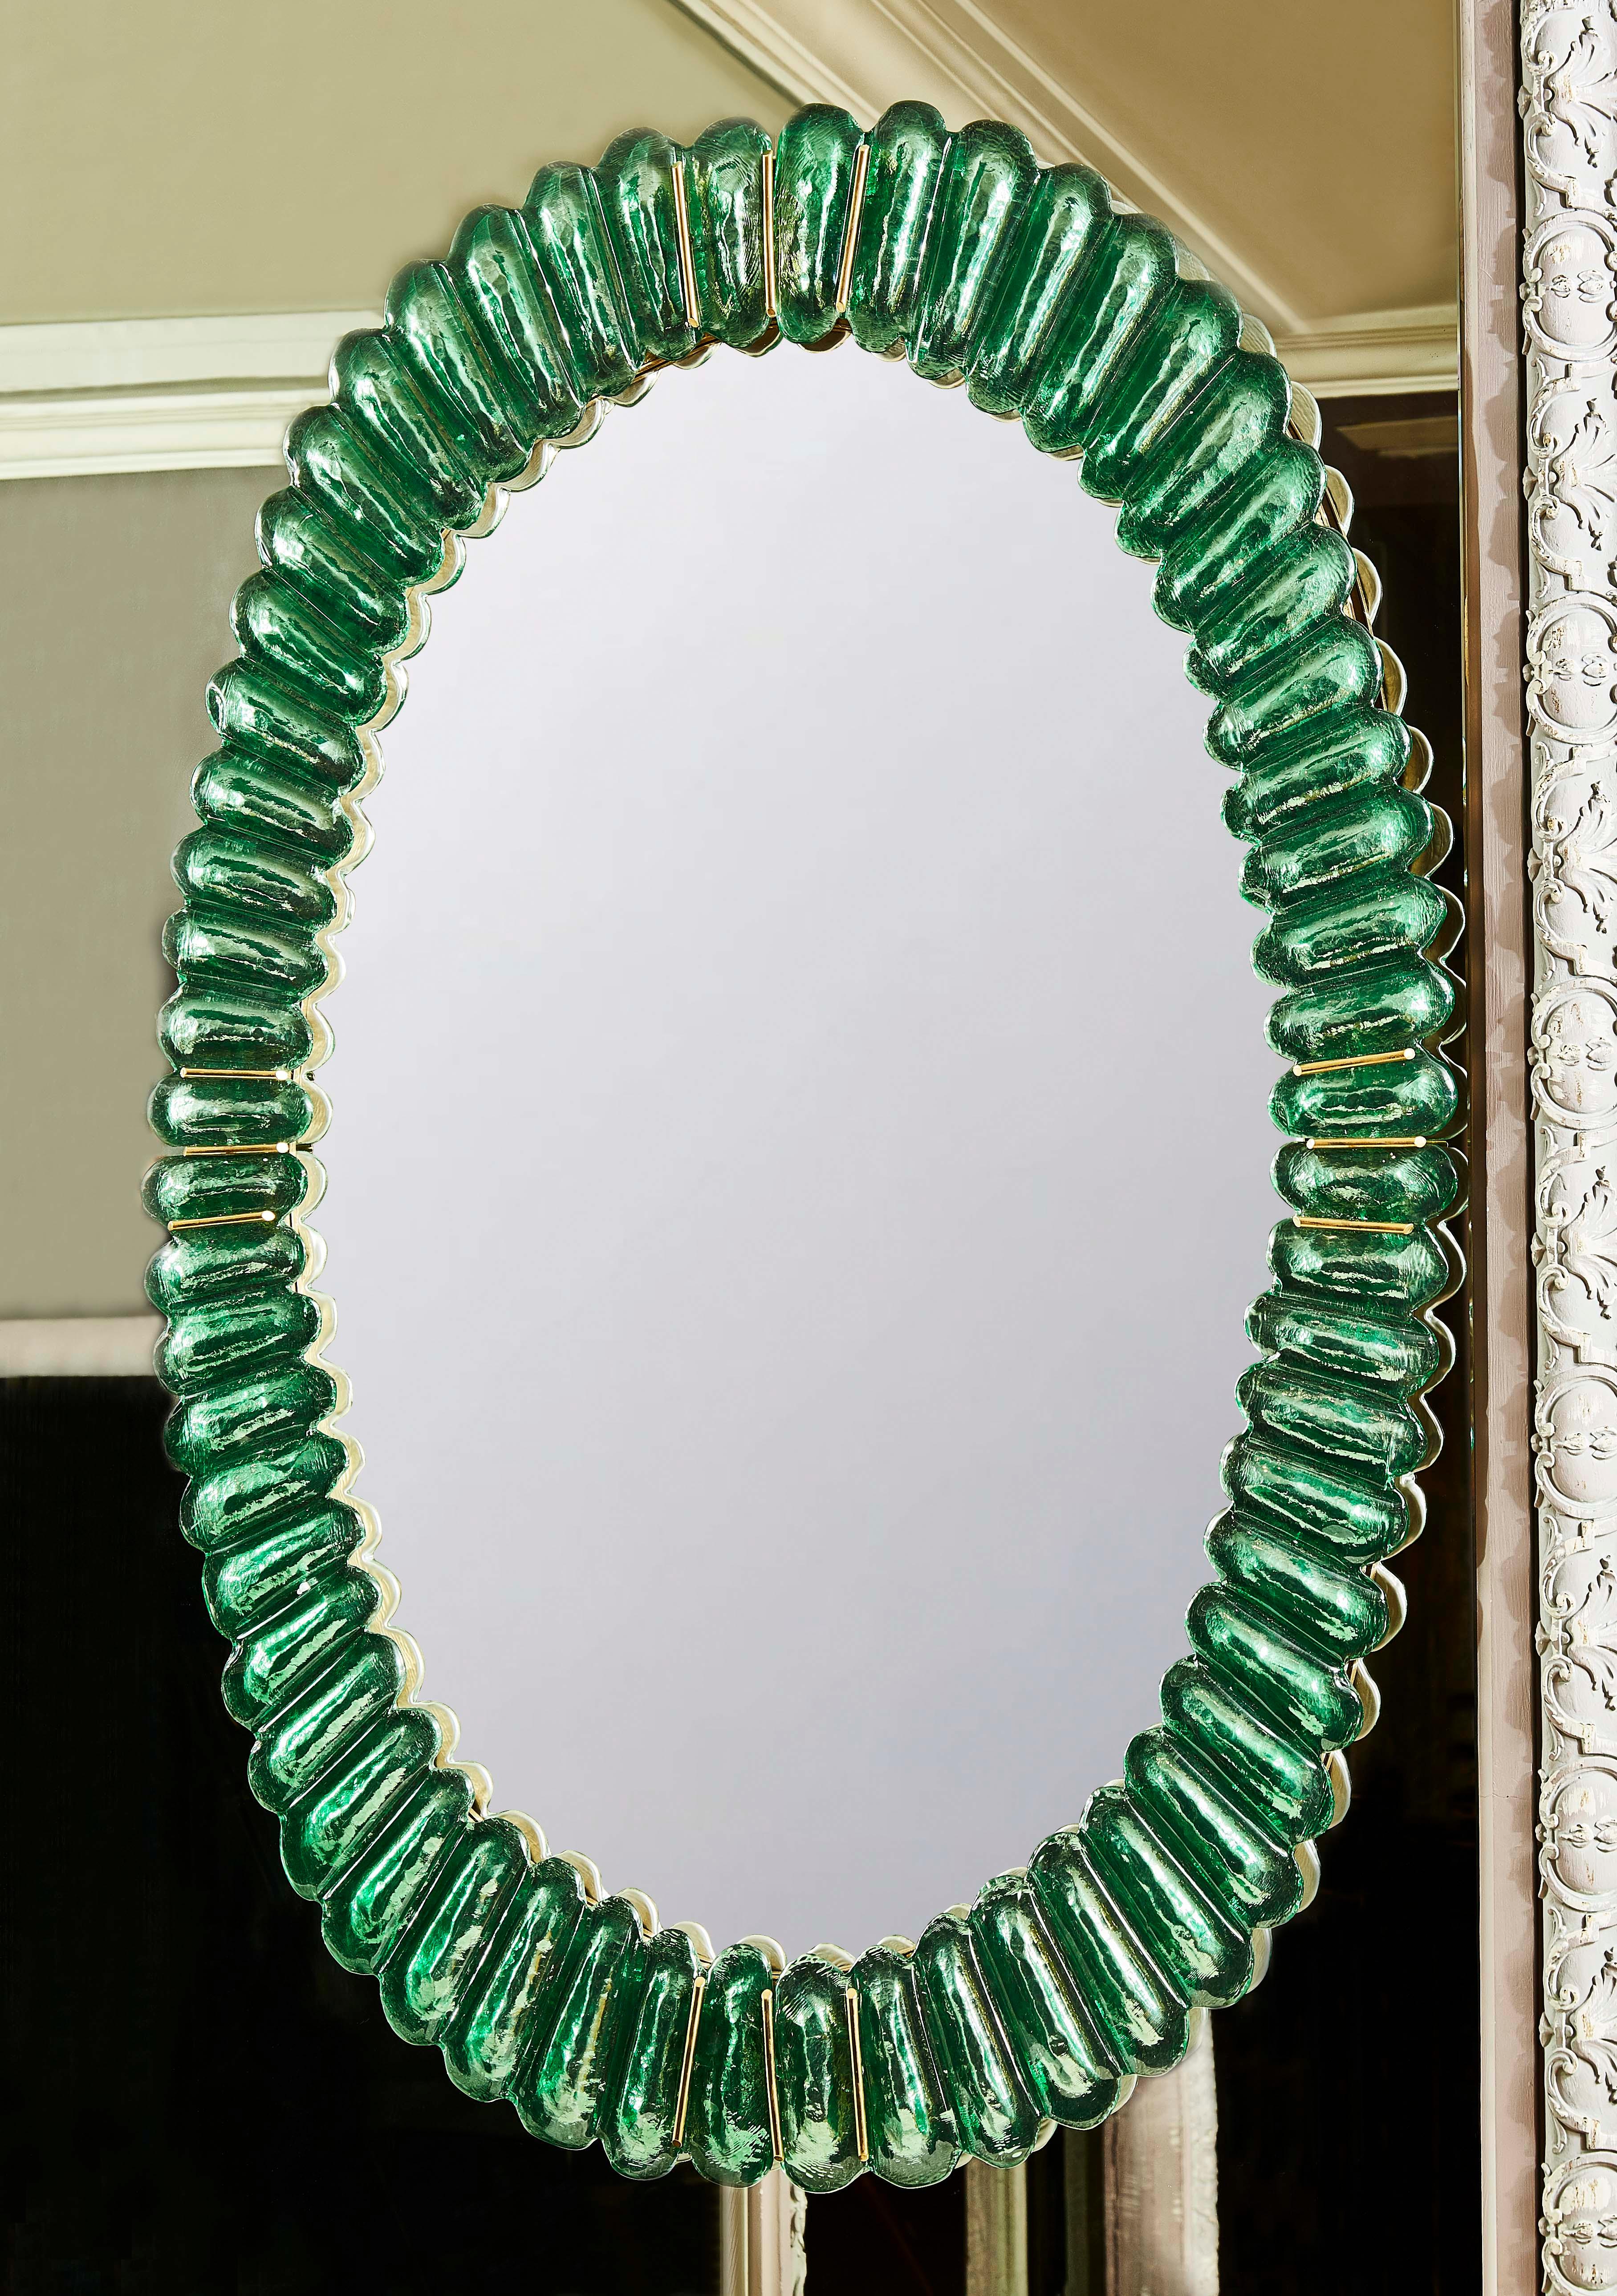 Pair of vintage oval mirrors made of green Murano glass and brass inlays. 
Italy, 1970s.